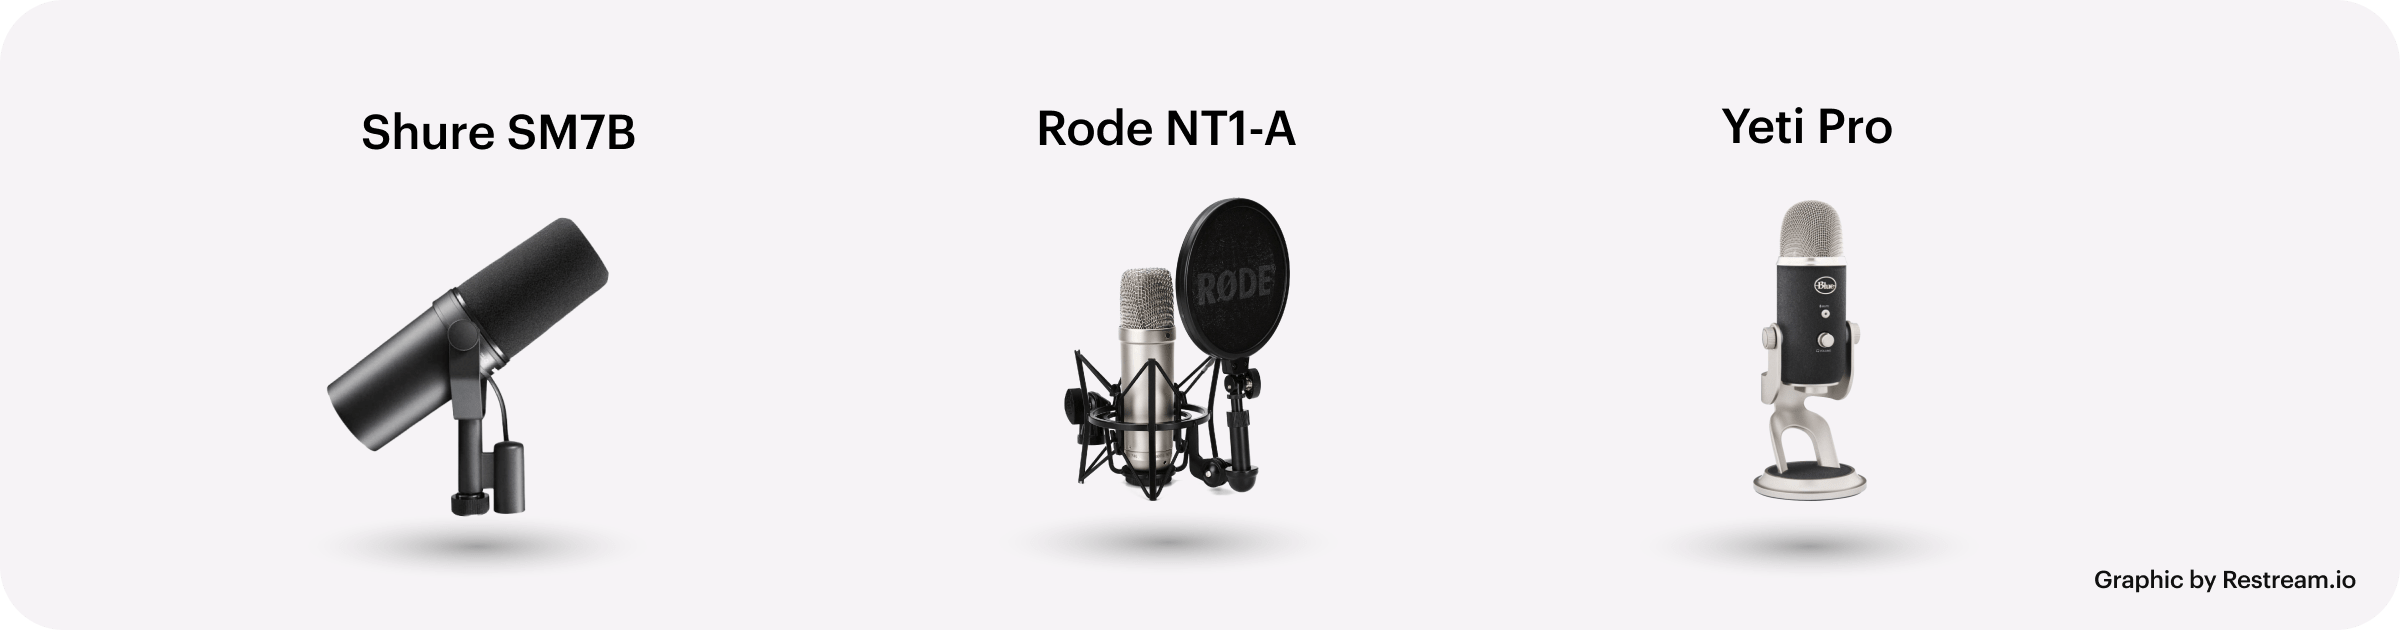 https://restream.io/blog/content/images/2020/04/podcasting-equipment-guide-5.png